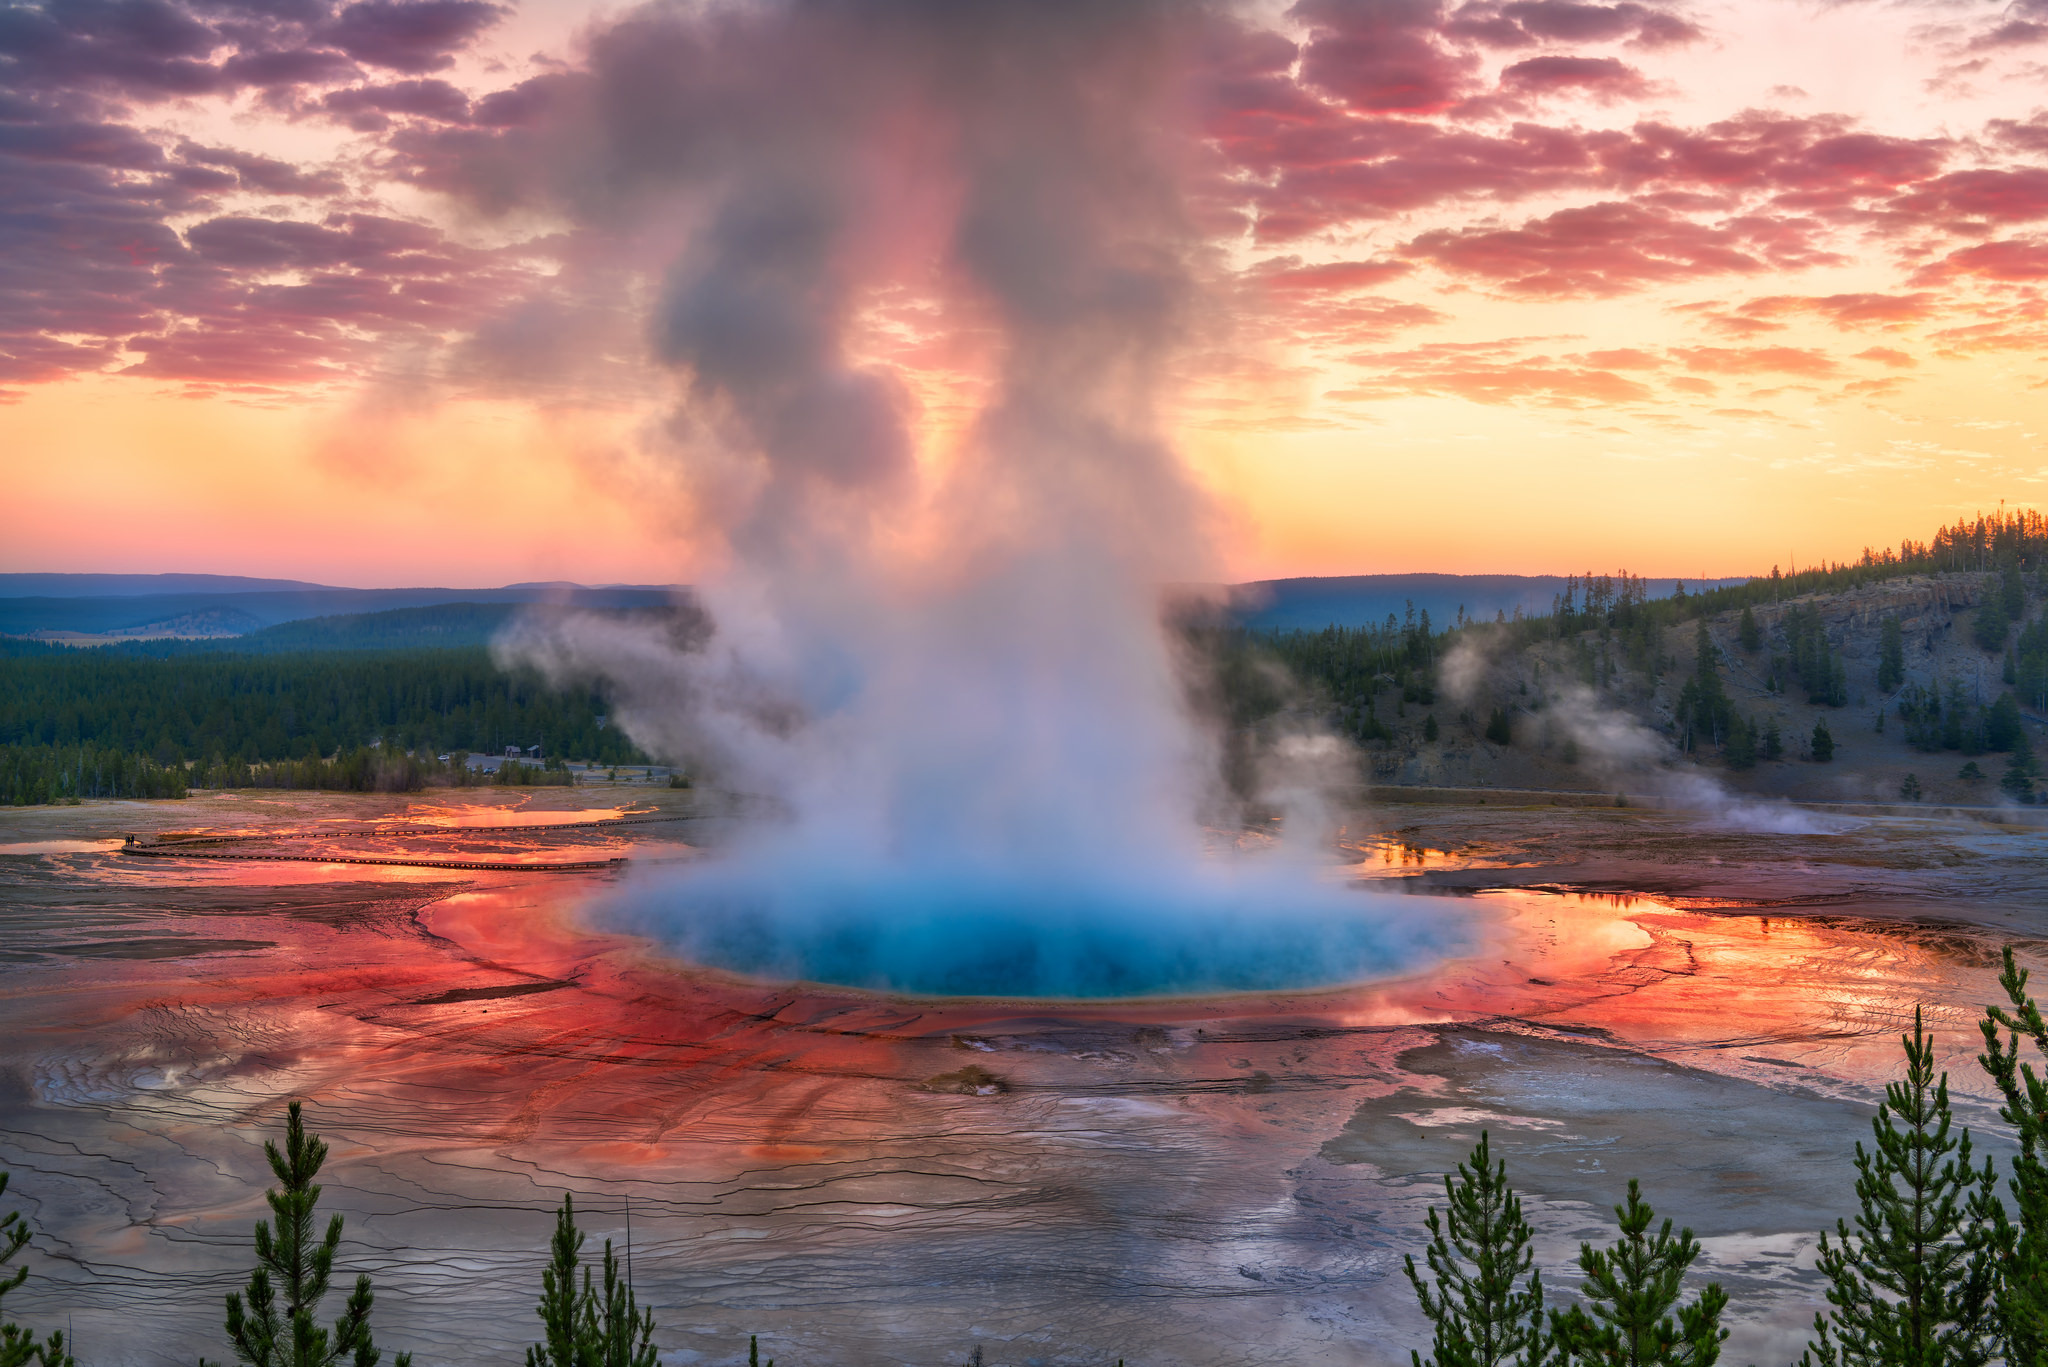 A geyser sprays water and vapour at sunset